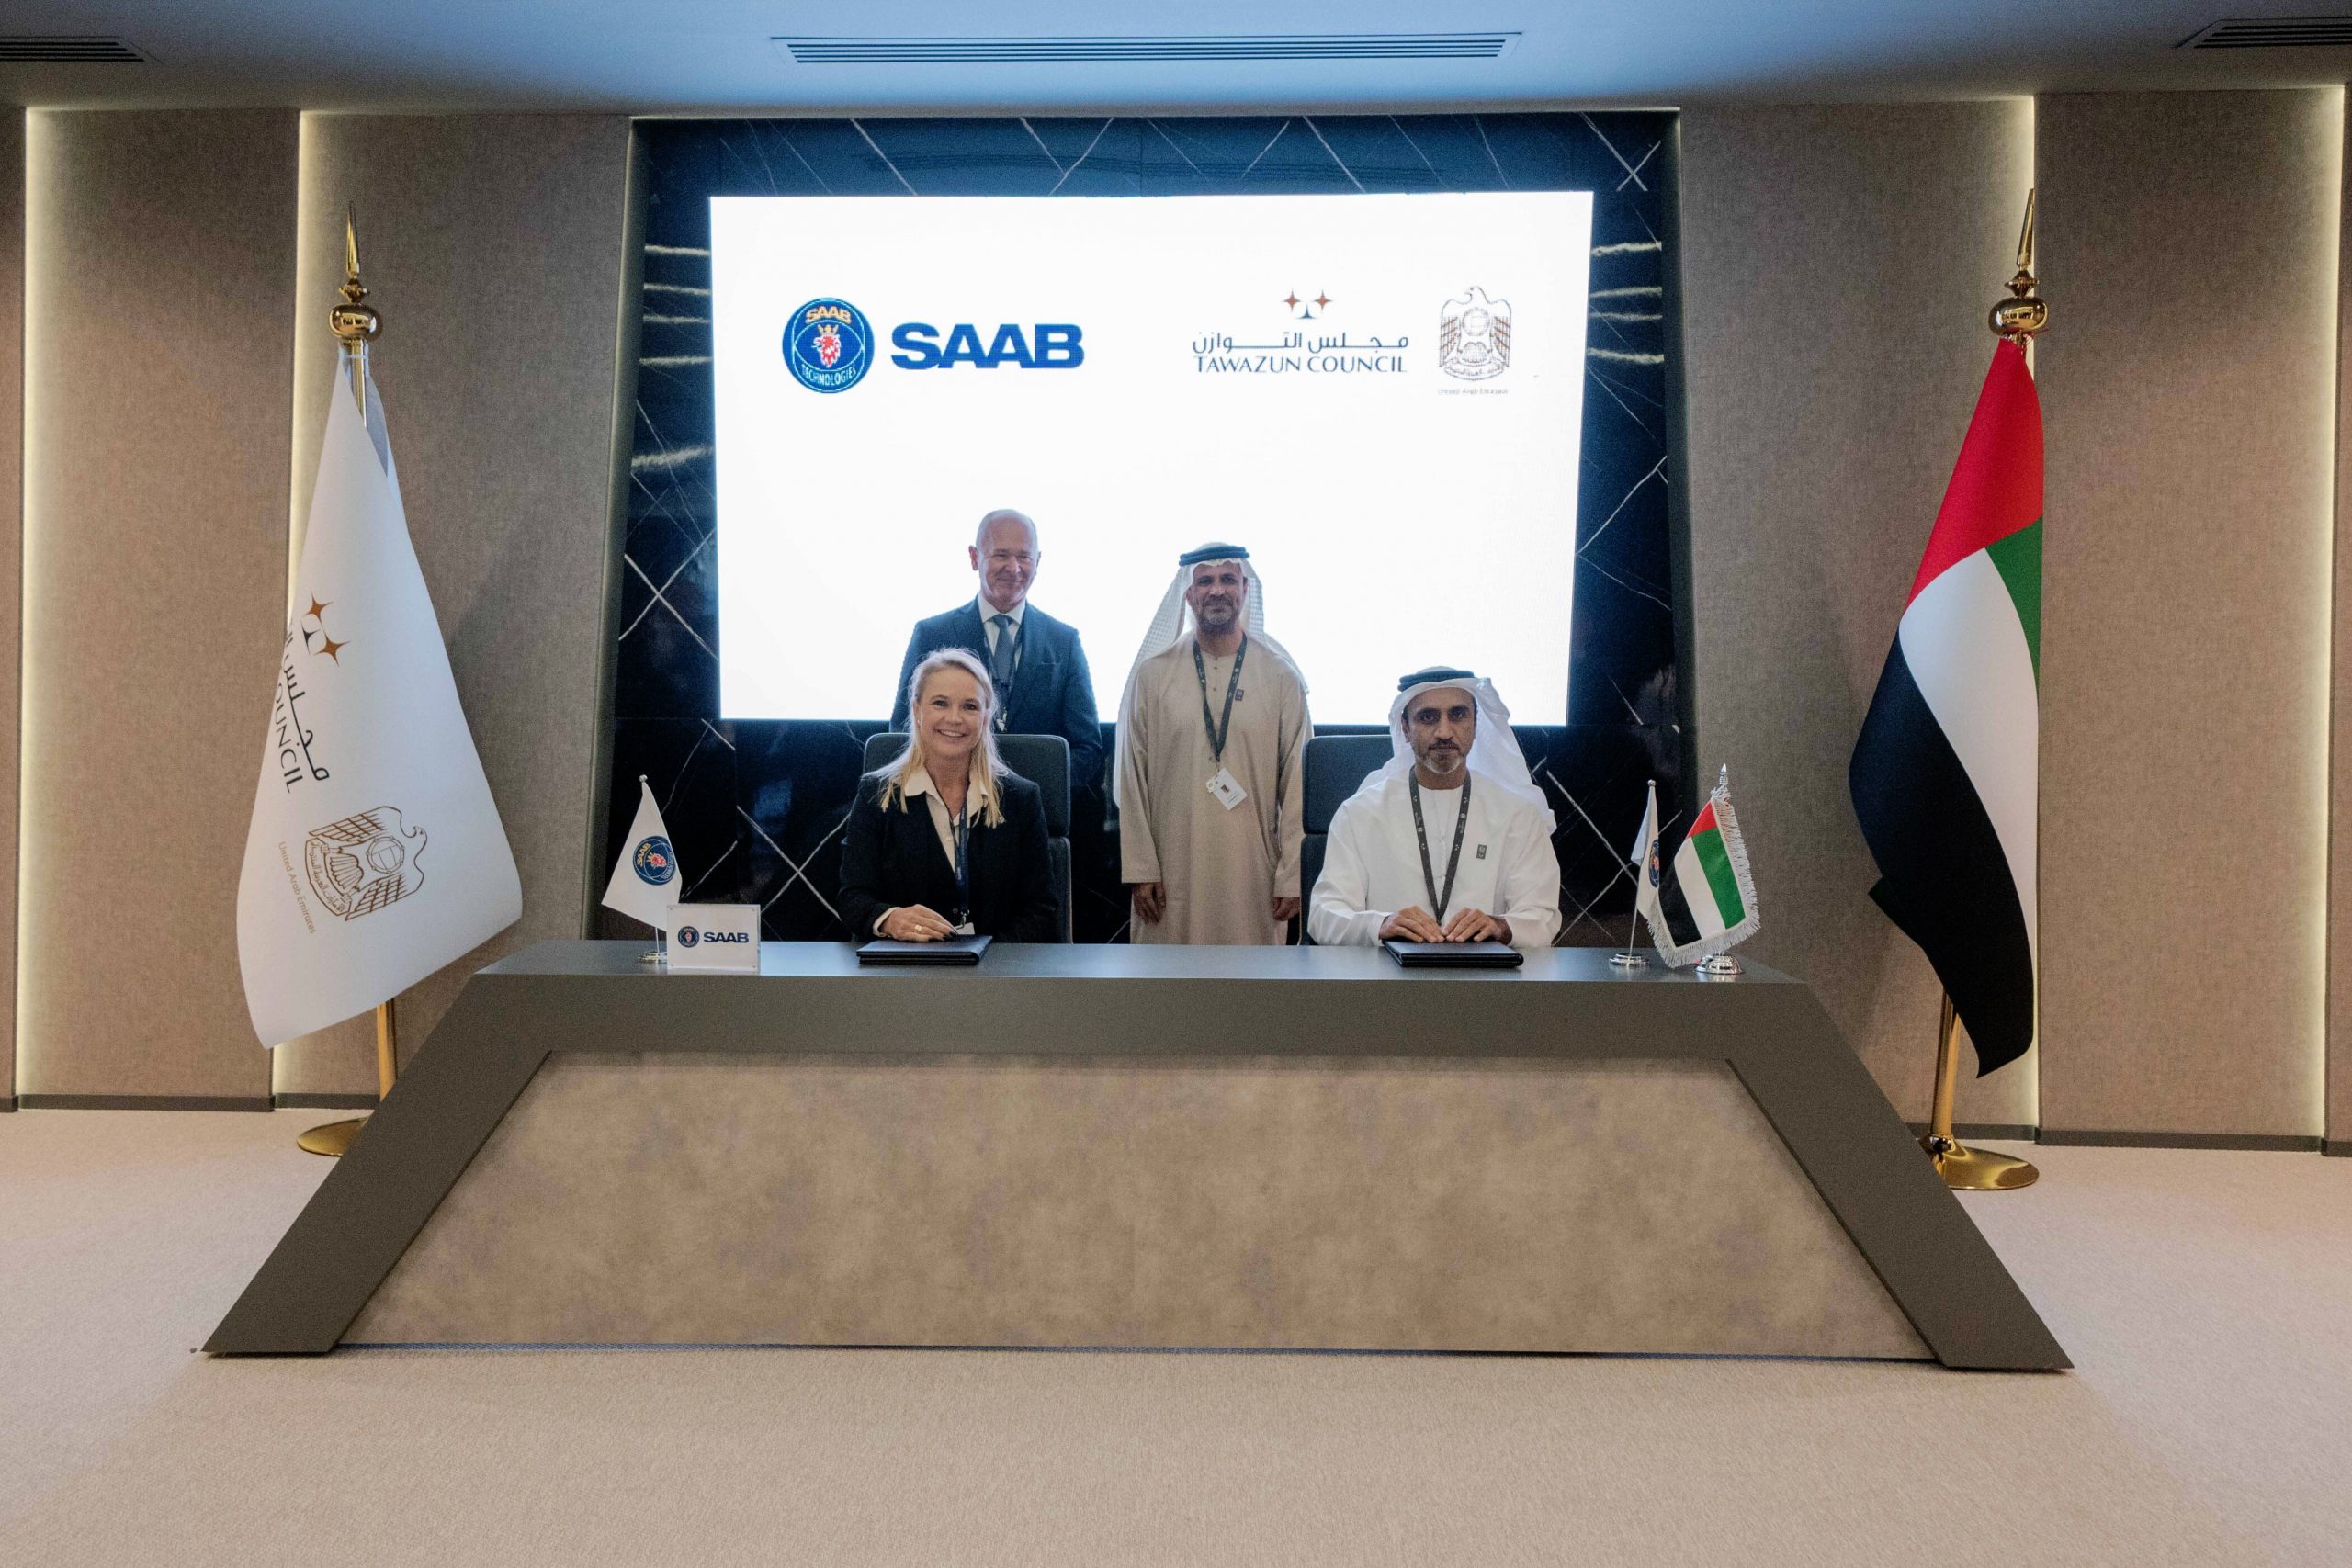 Tawazun Council partners with Saab to deliver sovereign 3D-printing capability